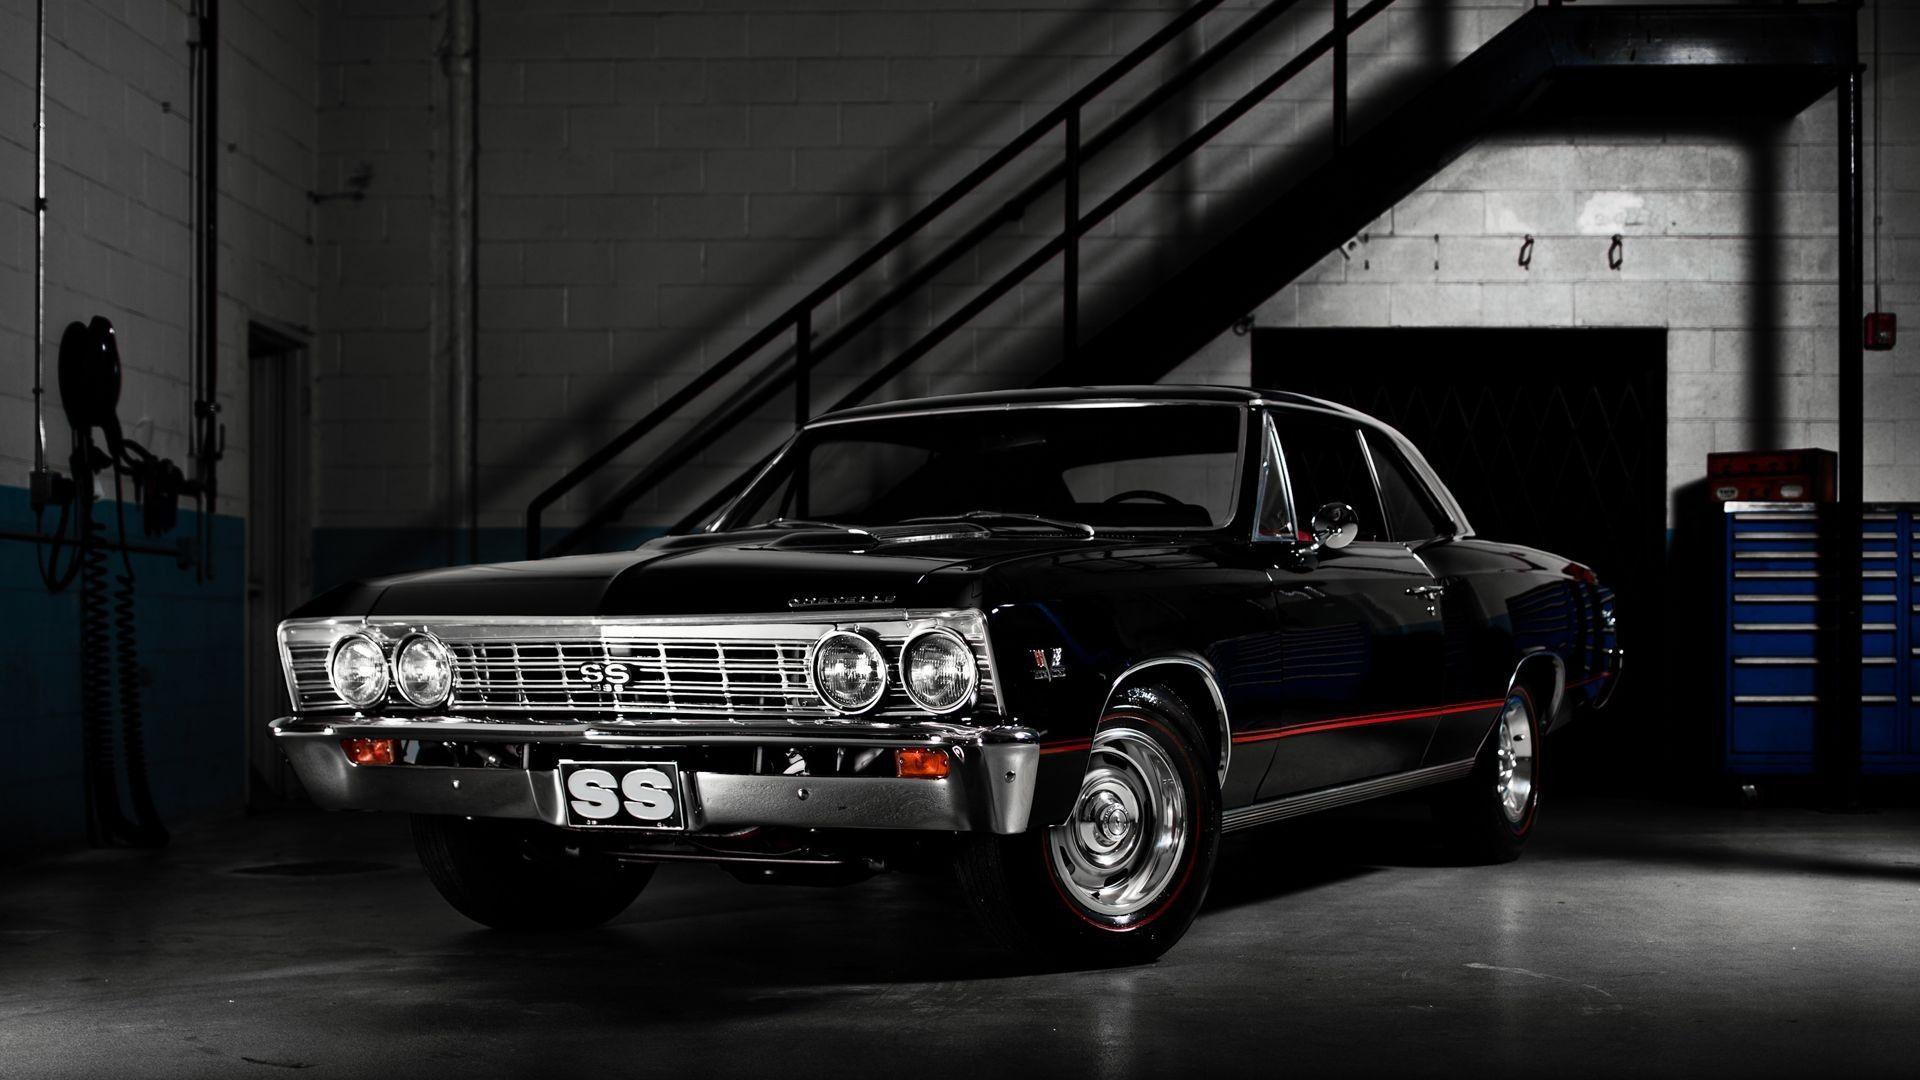 American Cars Black Chevelle Chevrolet SS Classic Muscle Wallpaper